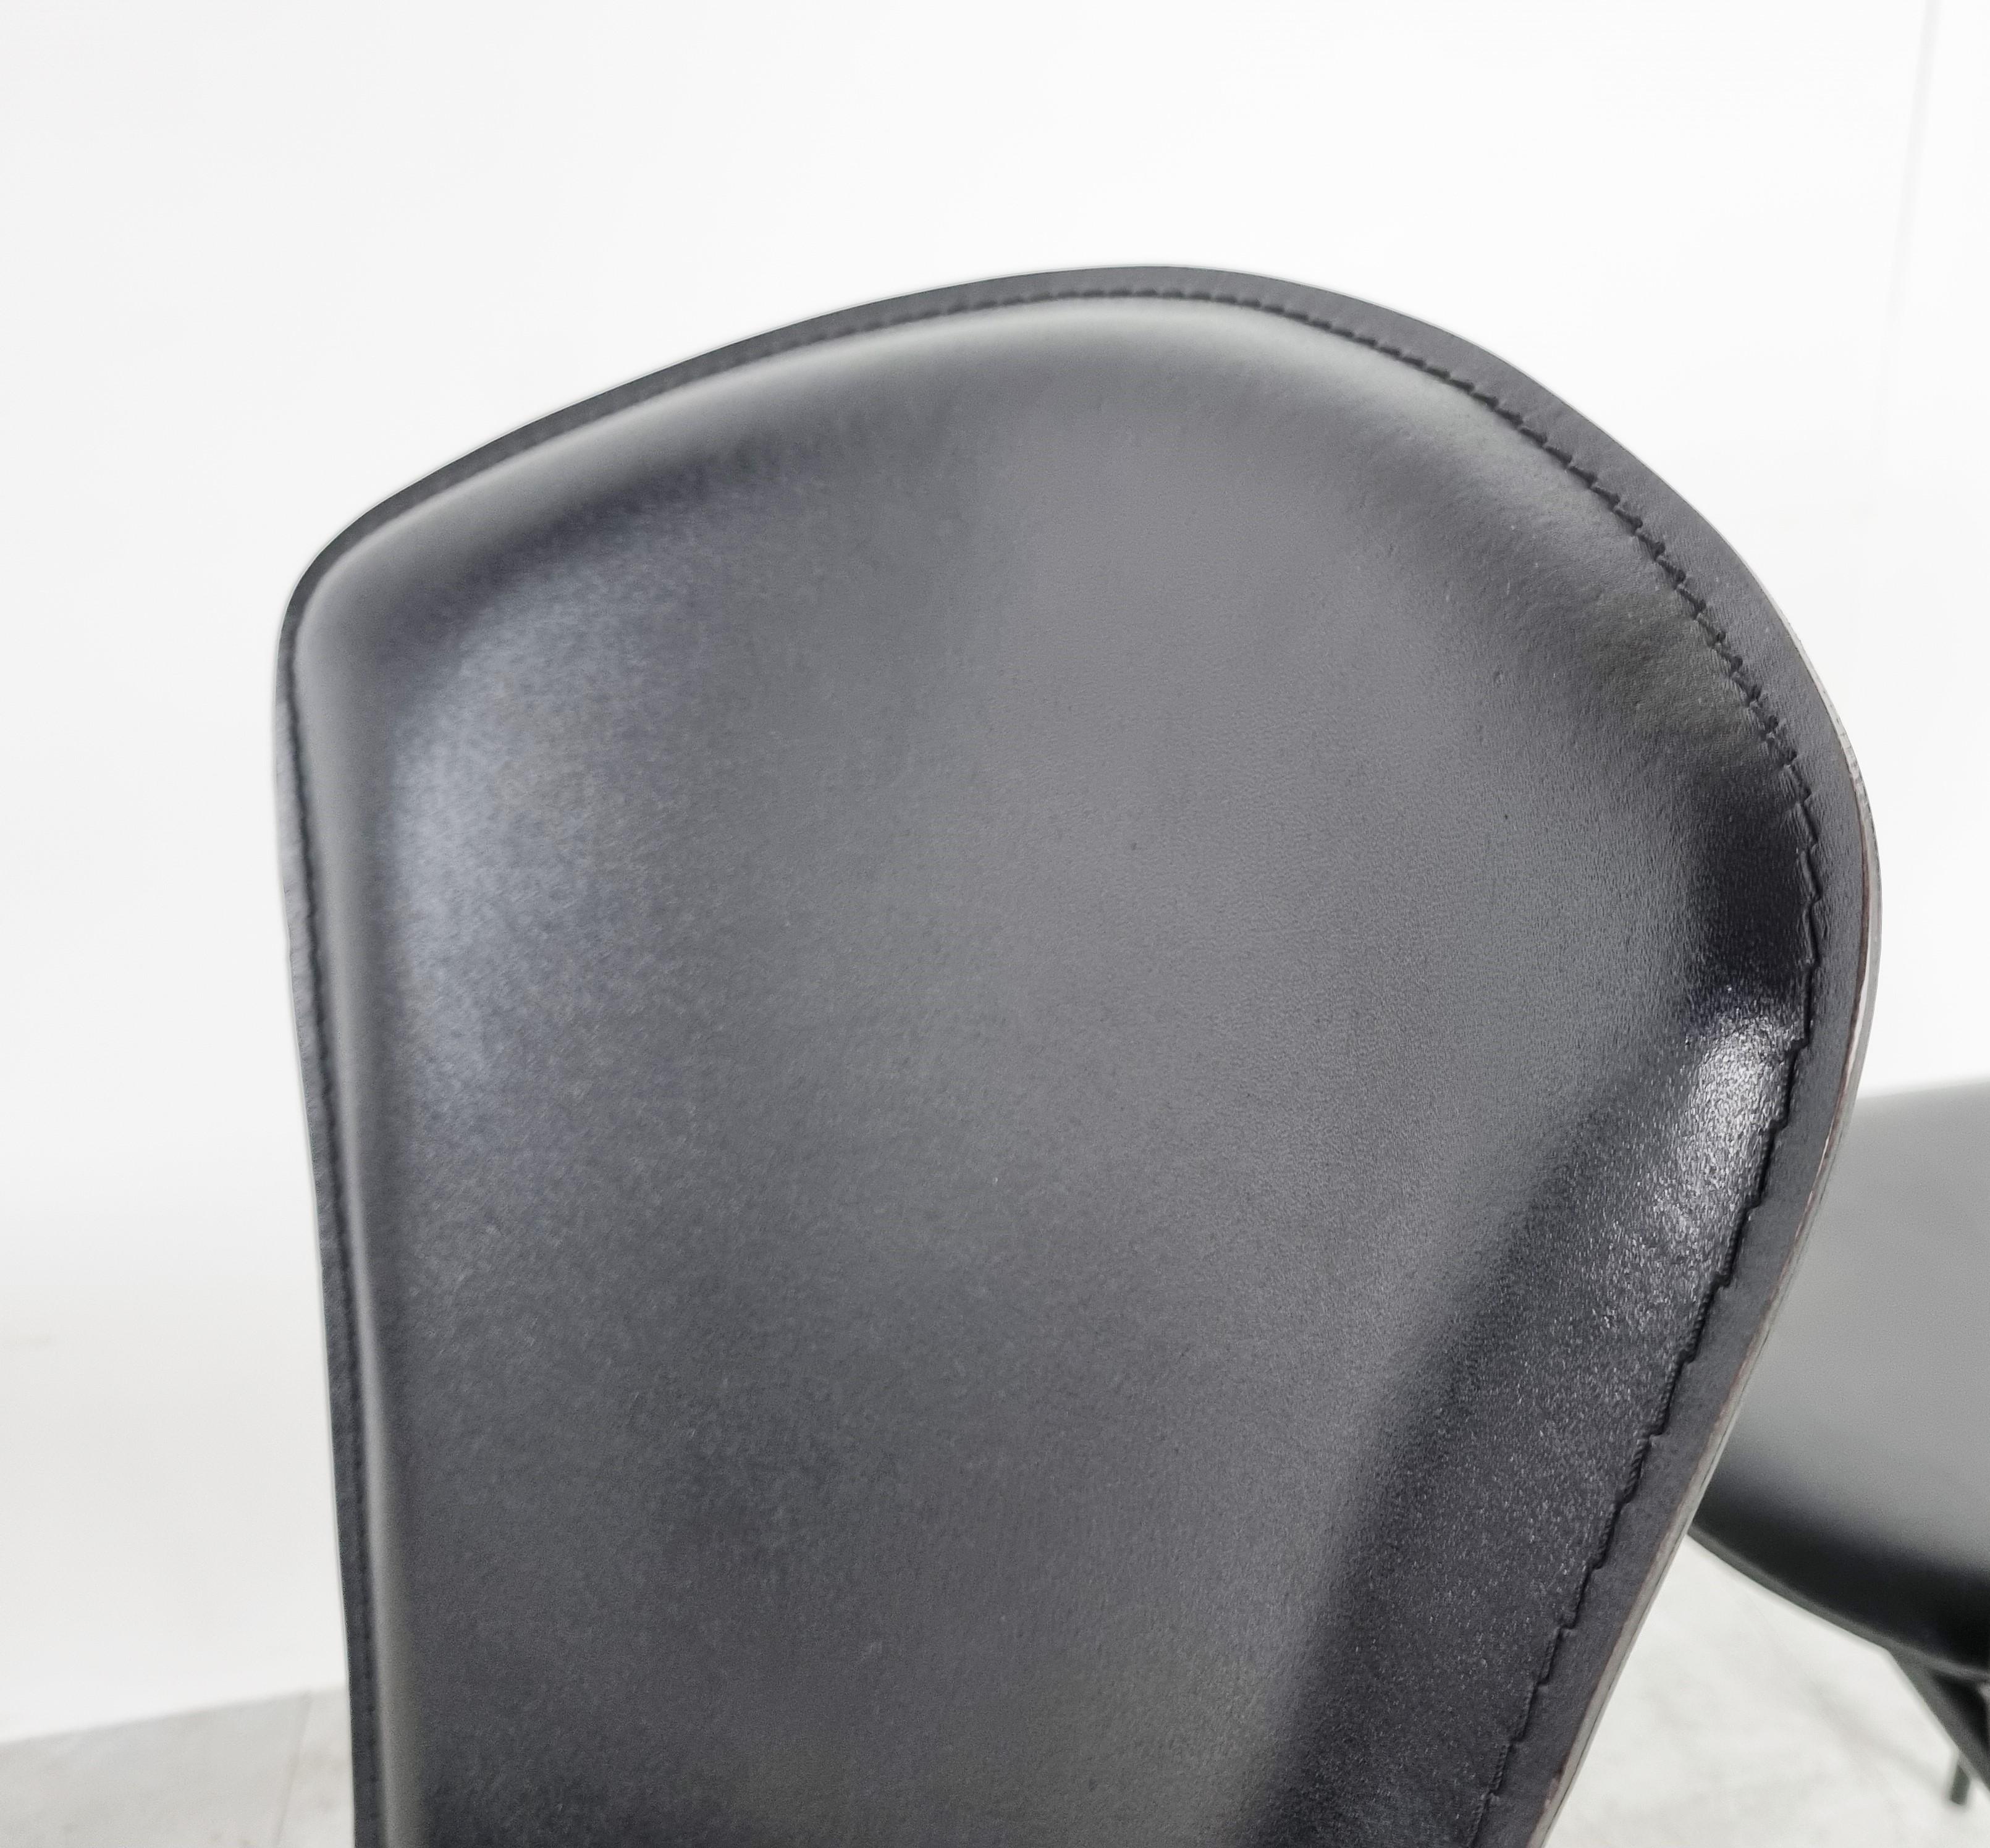 Set of 6 leather dining chairs in the style of Giancarlo Vegni. 

The chair seat well, are beautifully designed and made from quality materials.

Black leather upholstery and black lacquered metal frames.

The chairs are in very good condition